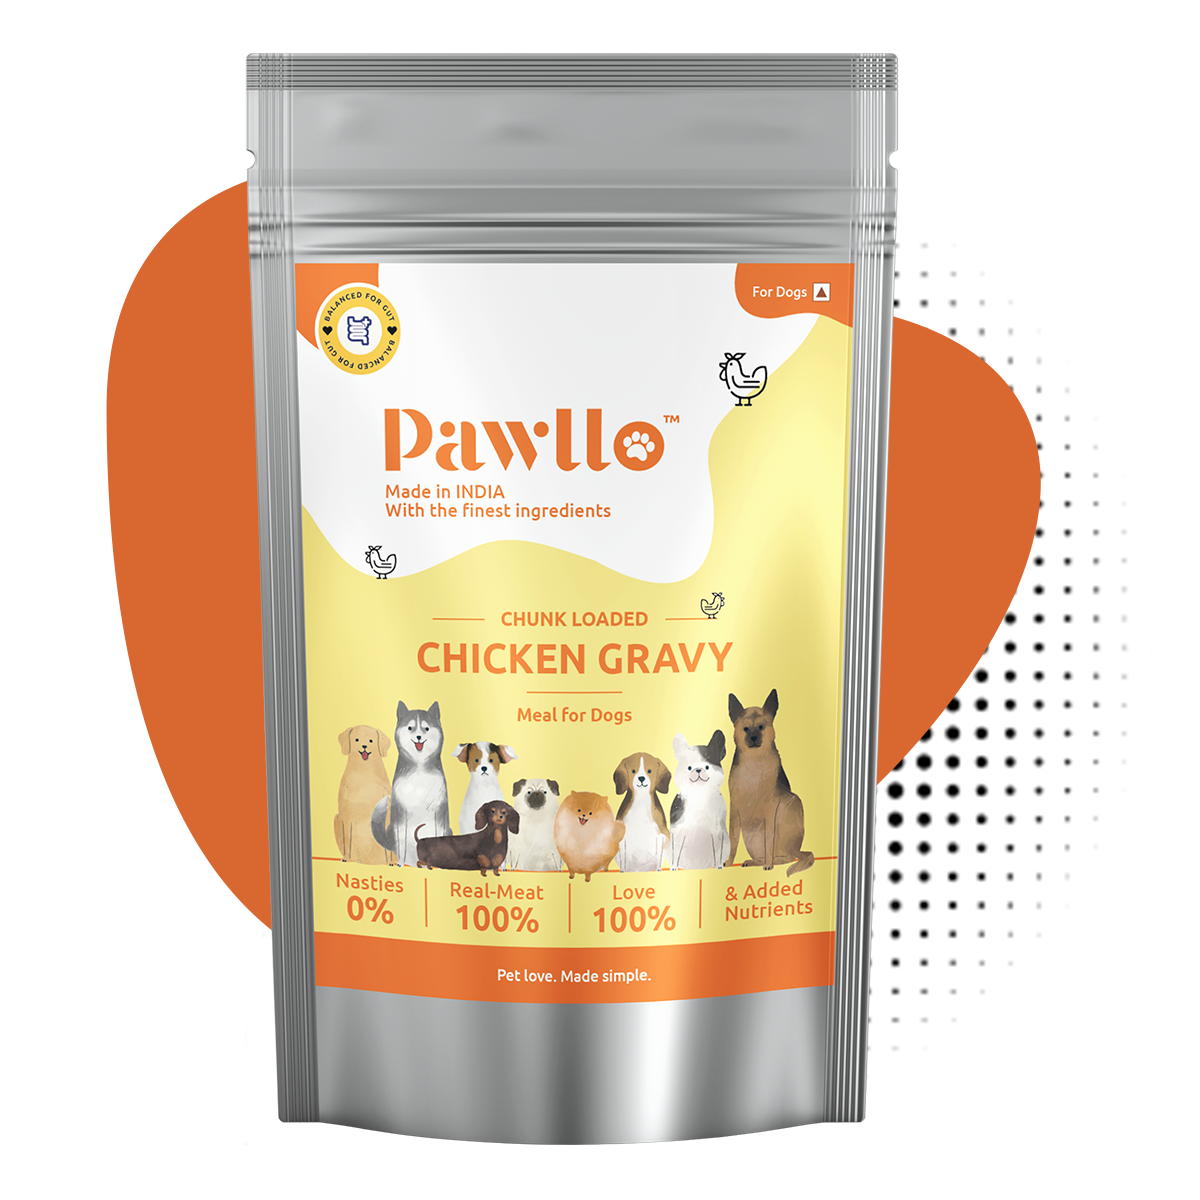 Wholesome Chicken Gravy (Dogs) Omega-3 Enriched, Protein-Packed Meal with Chicken Goodness - Energy Booster